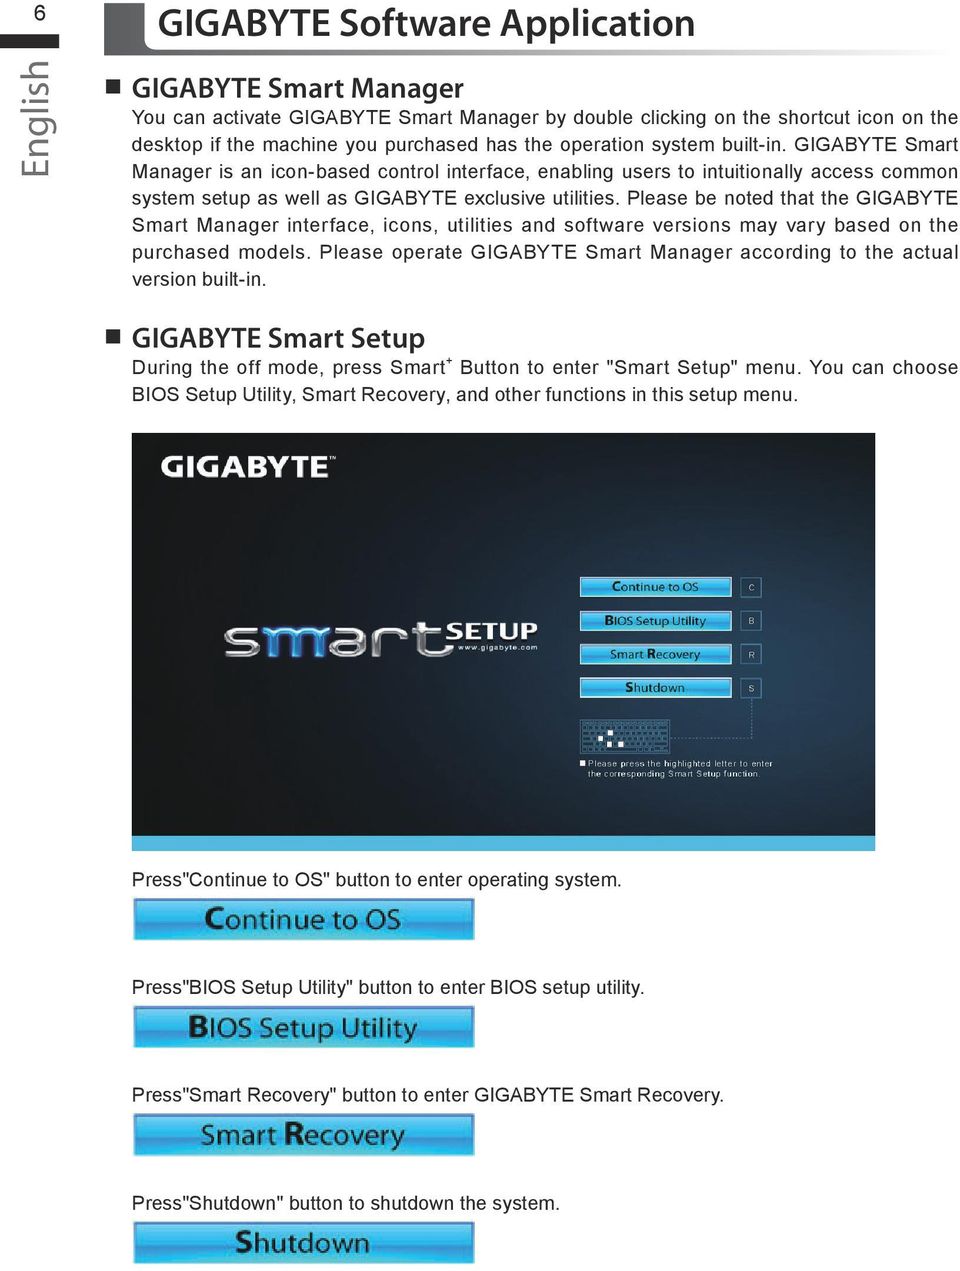 Please be noted that the GIGABYTE Smart Manager interface, icons, utilities and software versions may vary based on the purchased models.